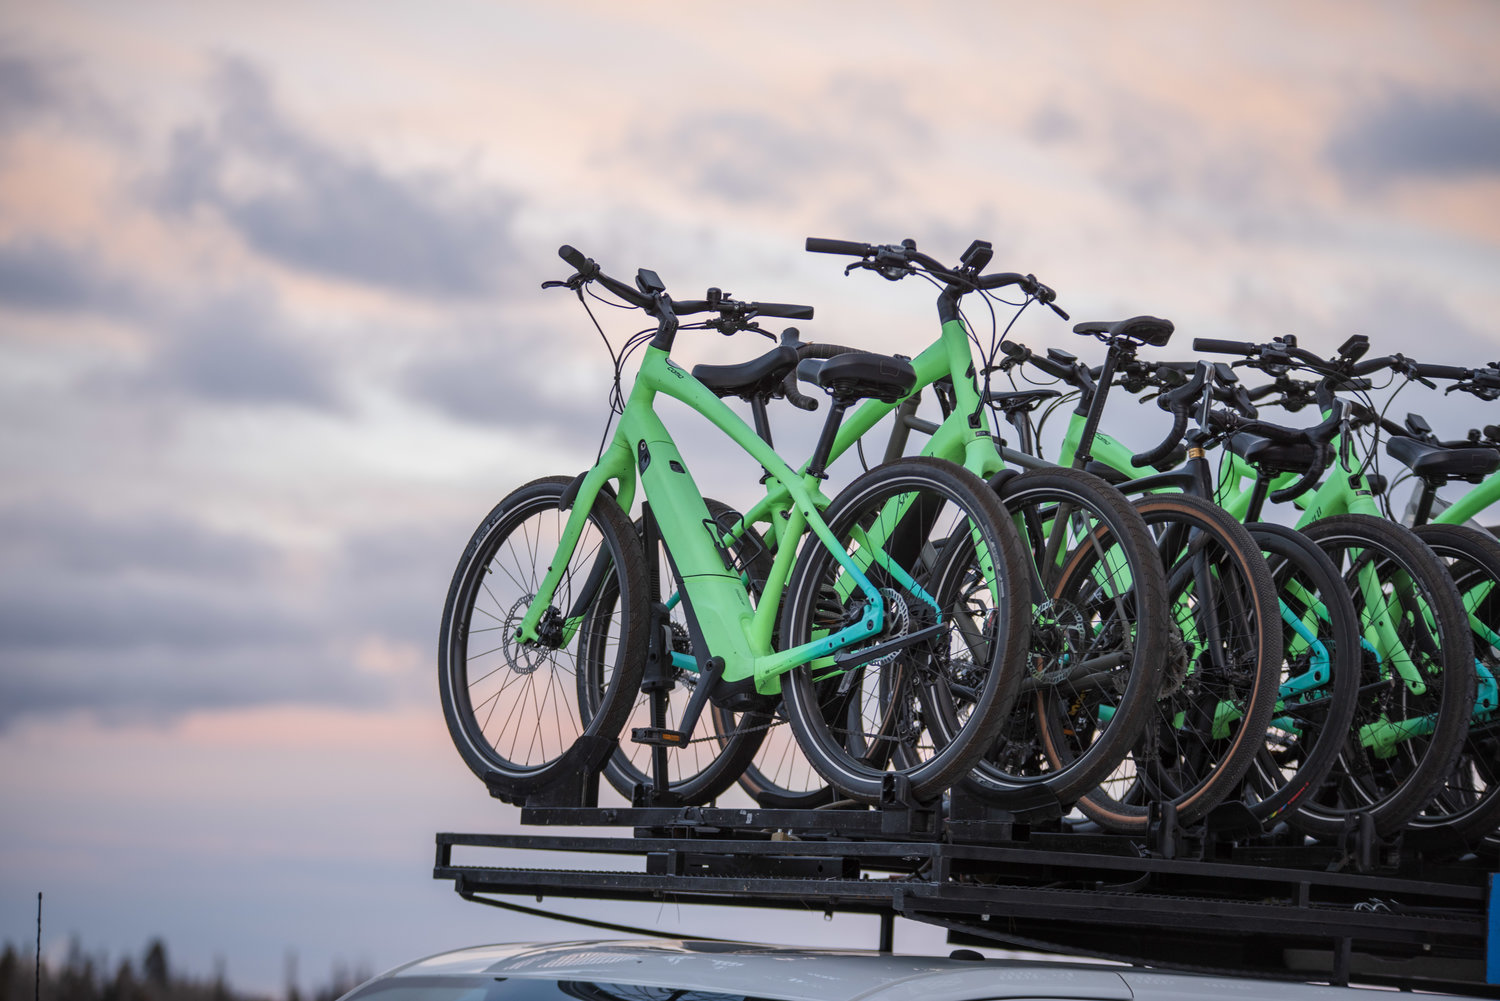 Have you ever seen so many beautiful e-bikes?